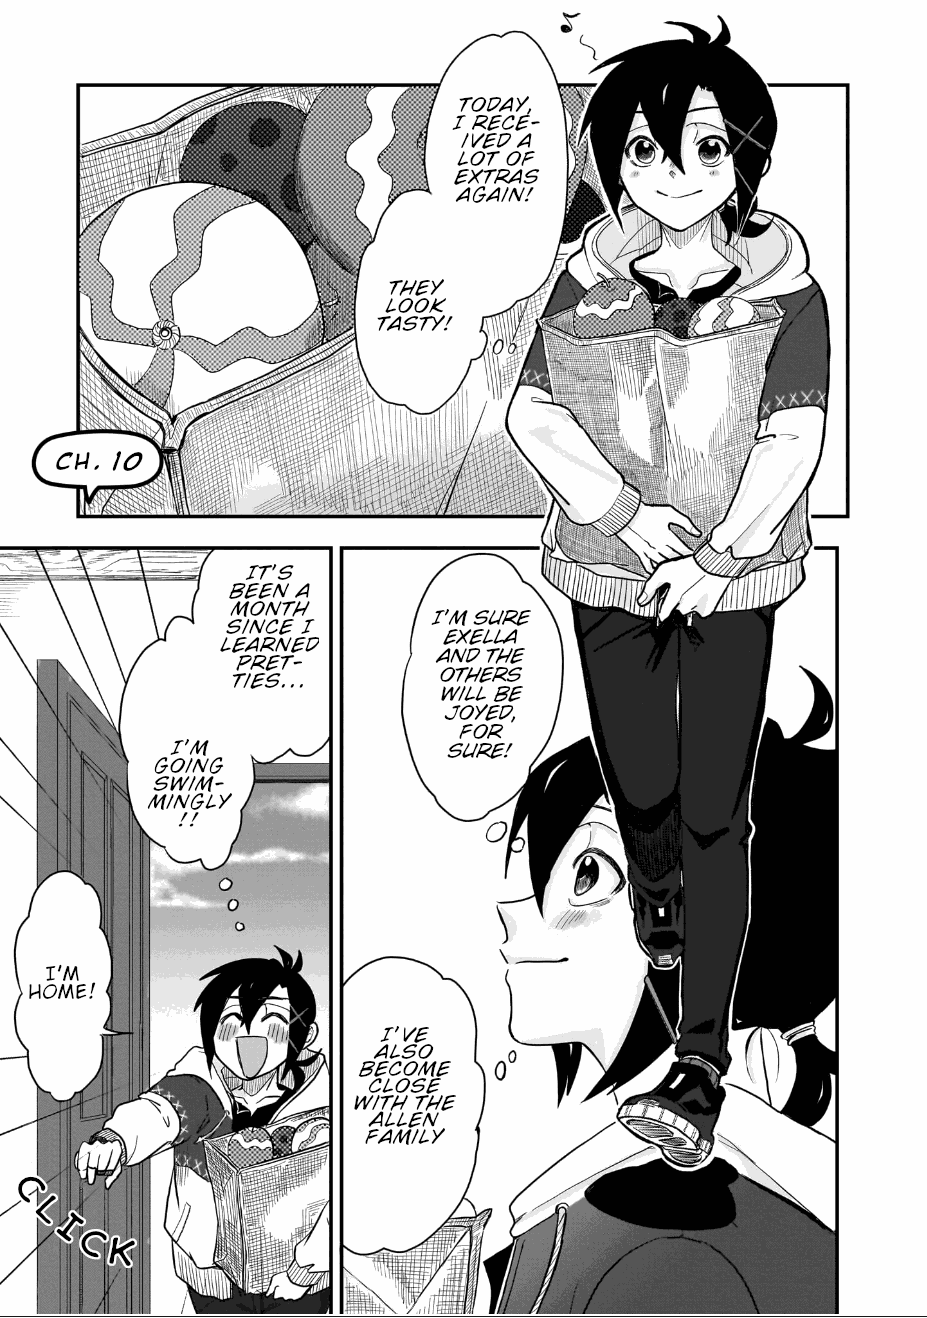 Even If I Was Reincarnated Into This Cruel World, My Cuteness Will Save Everyone! - chapter 10 - #1